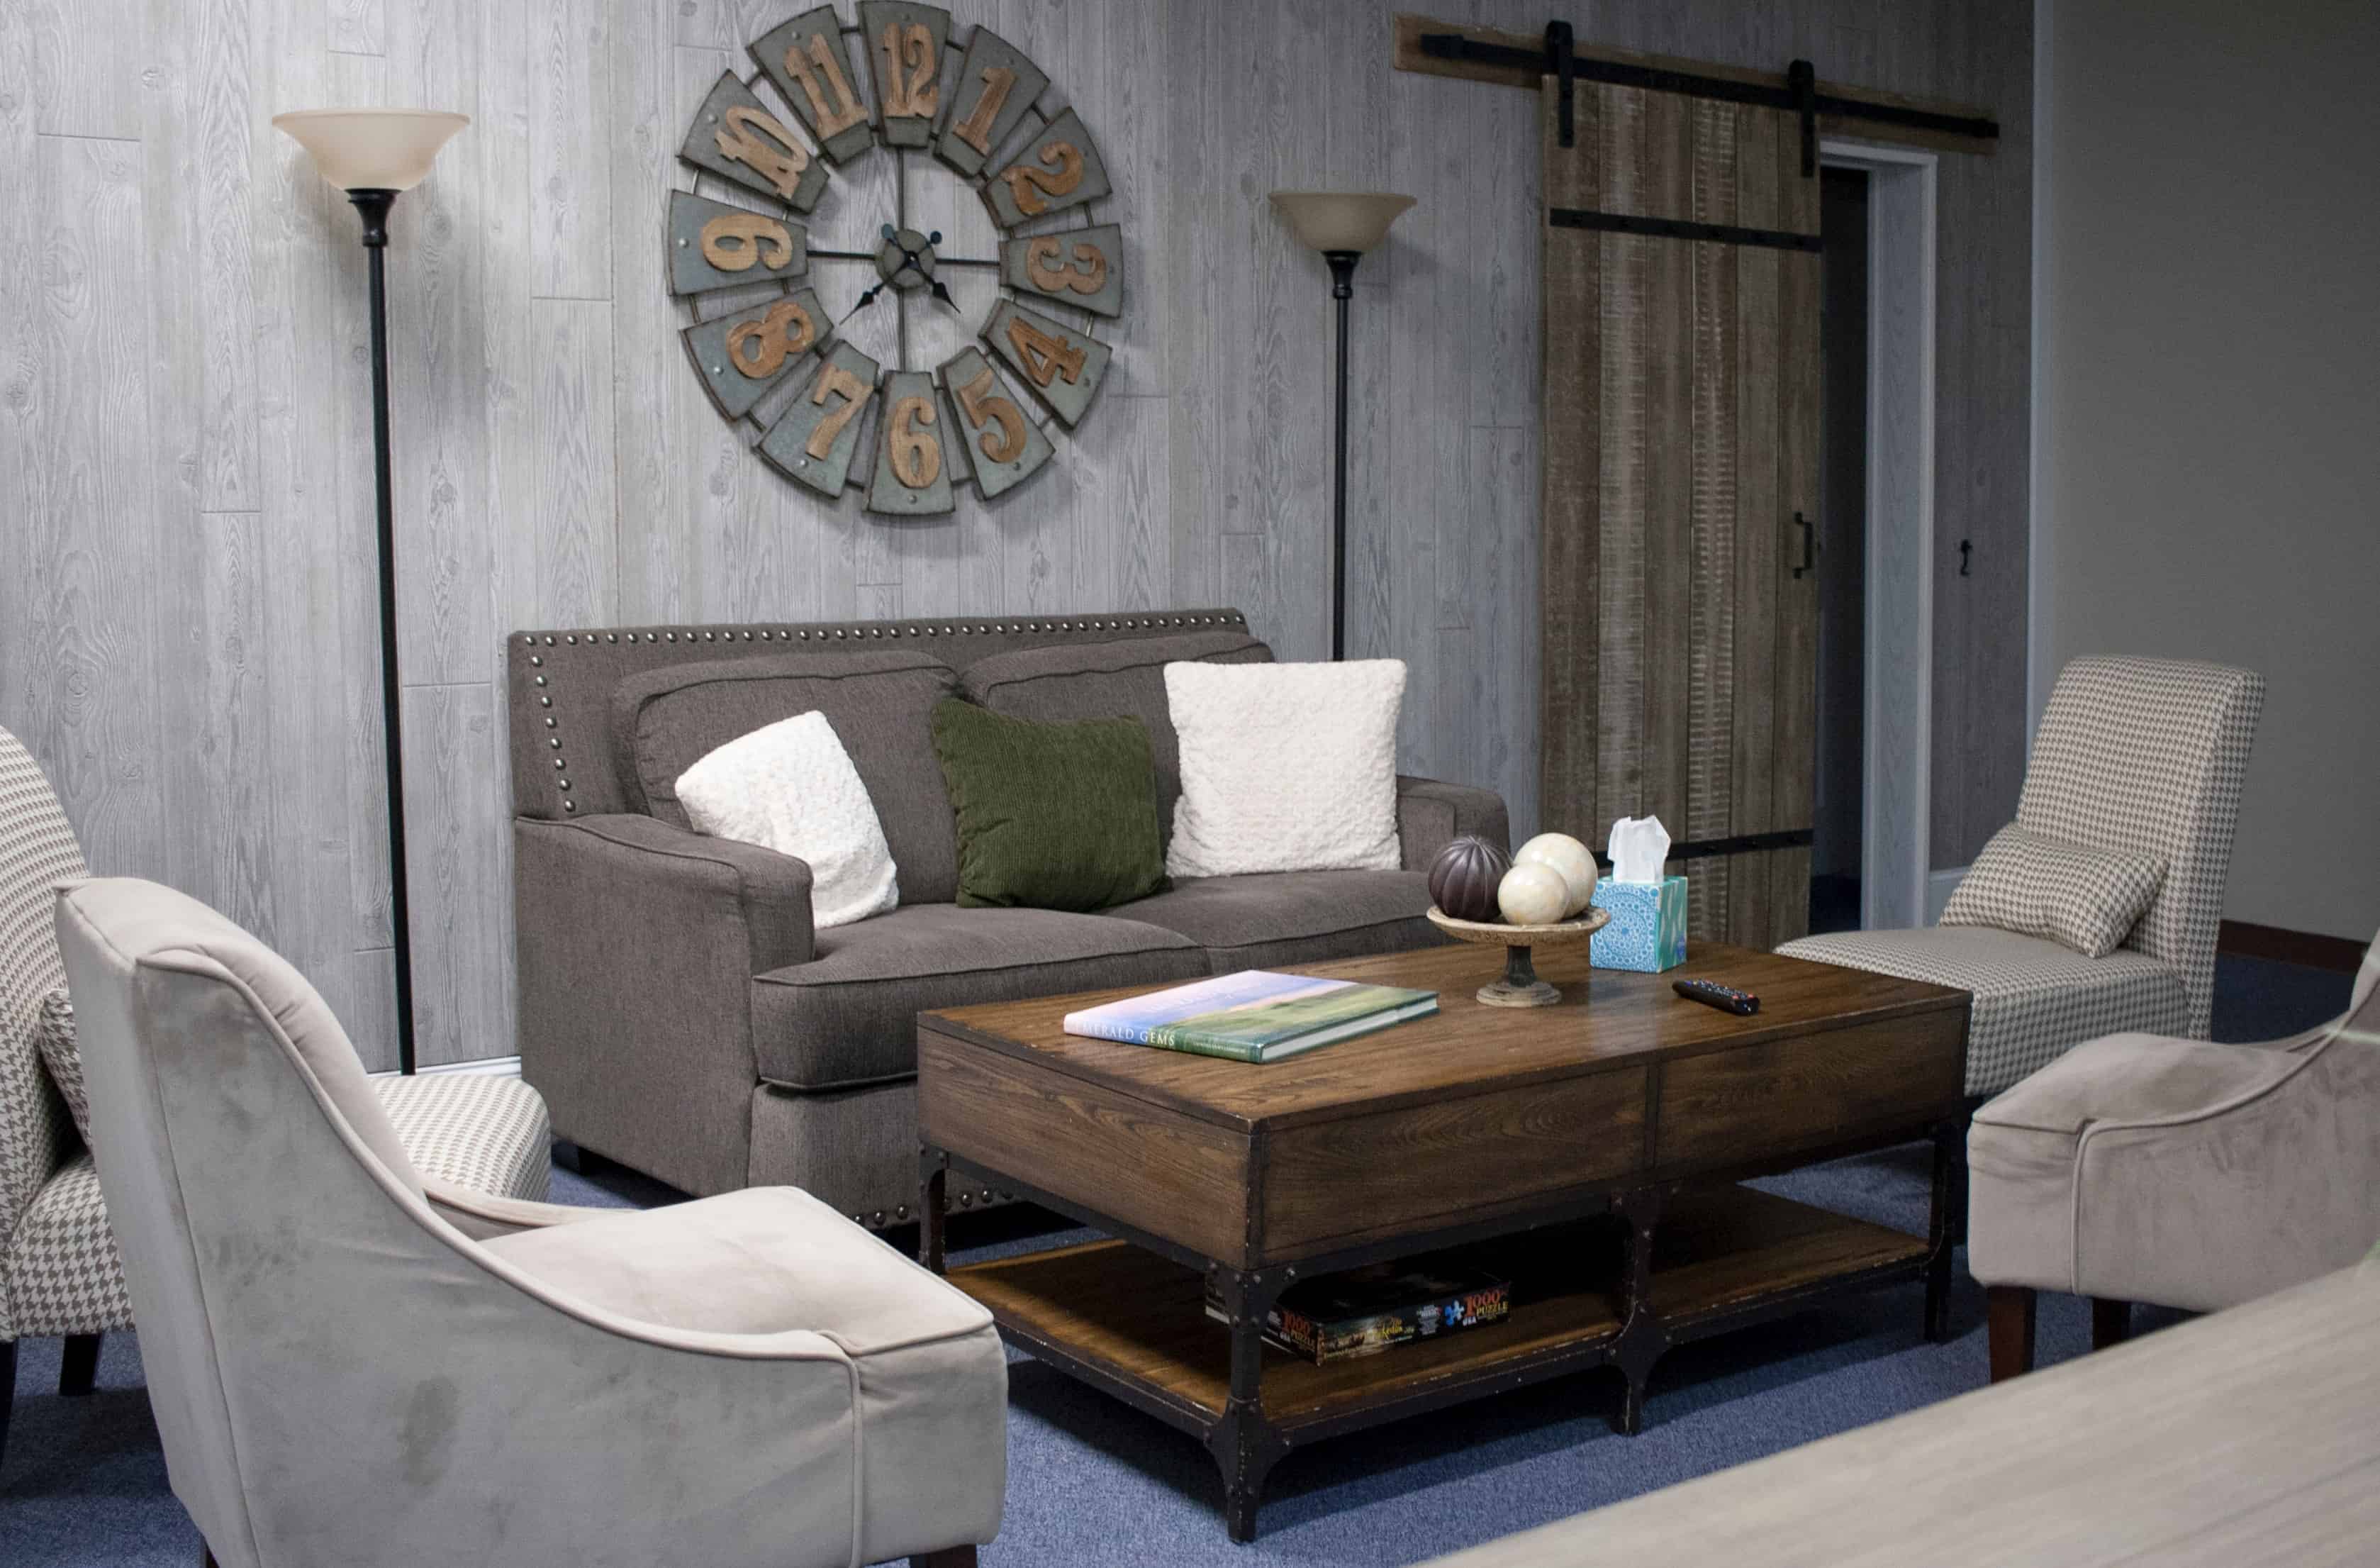 the interior of a home showcasing reclaimed barn wood on the walls and with a barn door